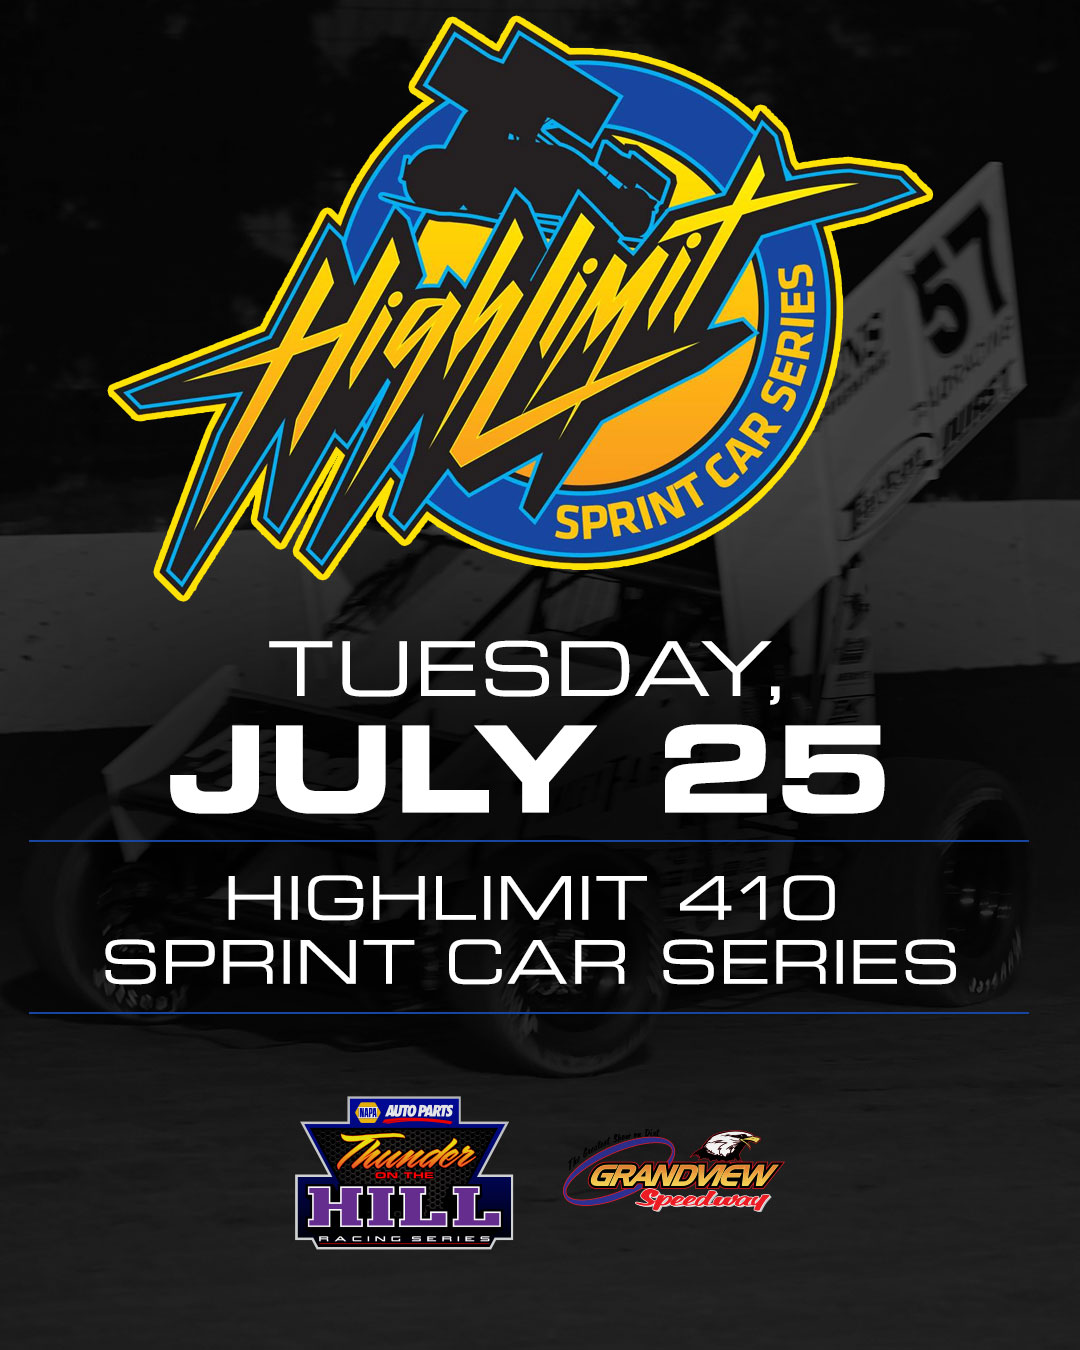 COWPATTY NATION GRANDVIEW SPEEDWAY THUNDER ON THE HILL ADDS "HIGH